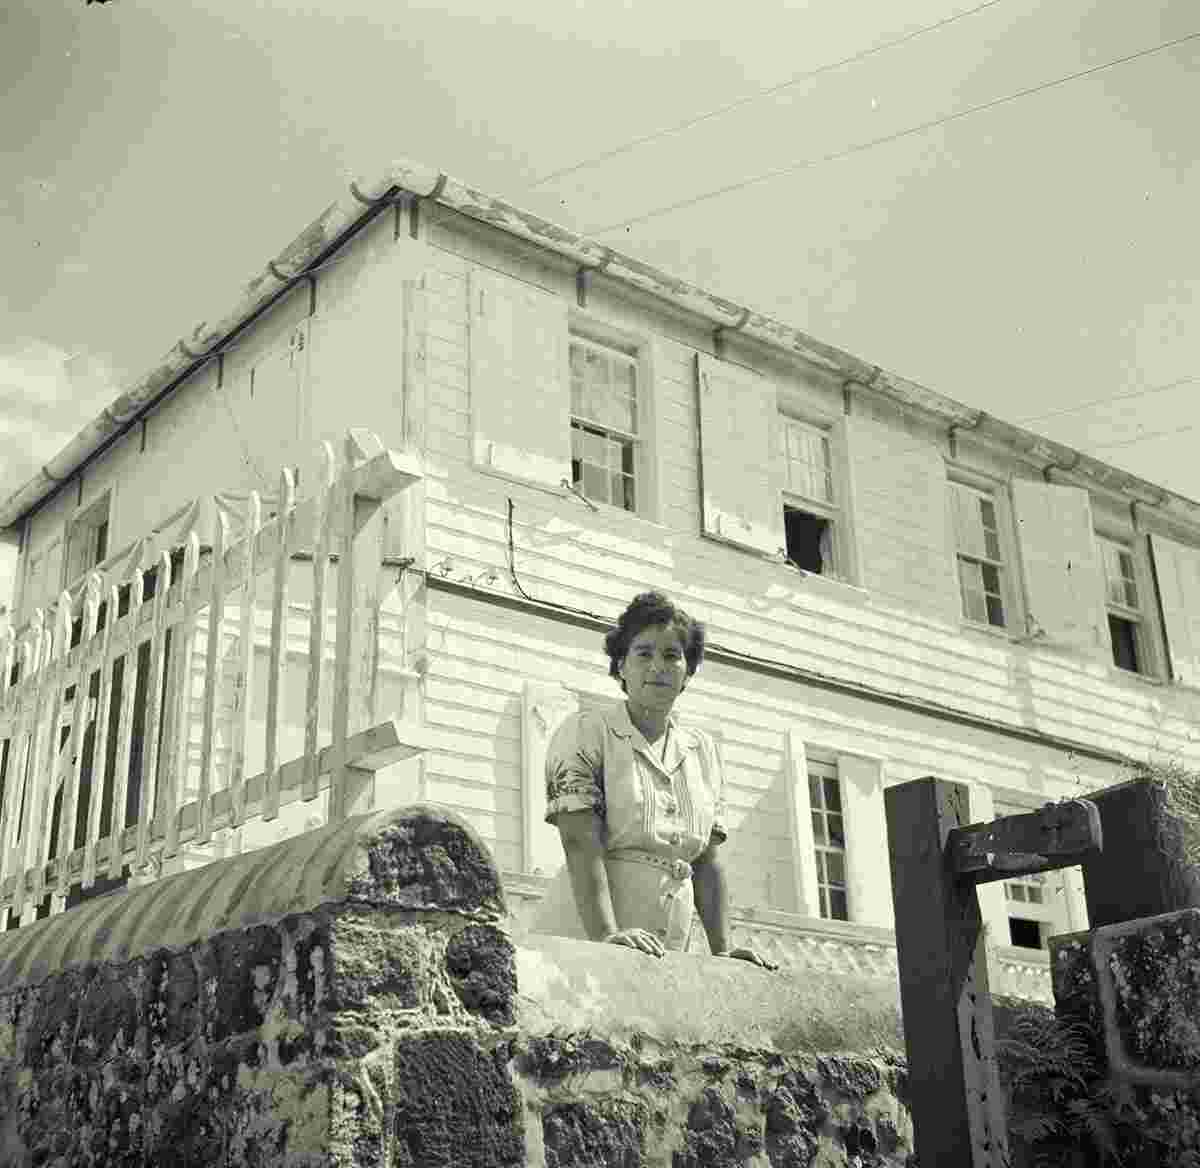 Windwardside. Mrs Chocolate in front of her house, 1947